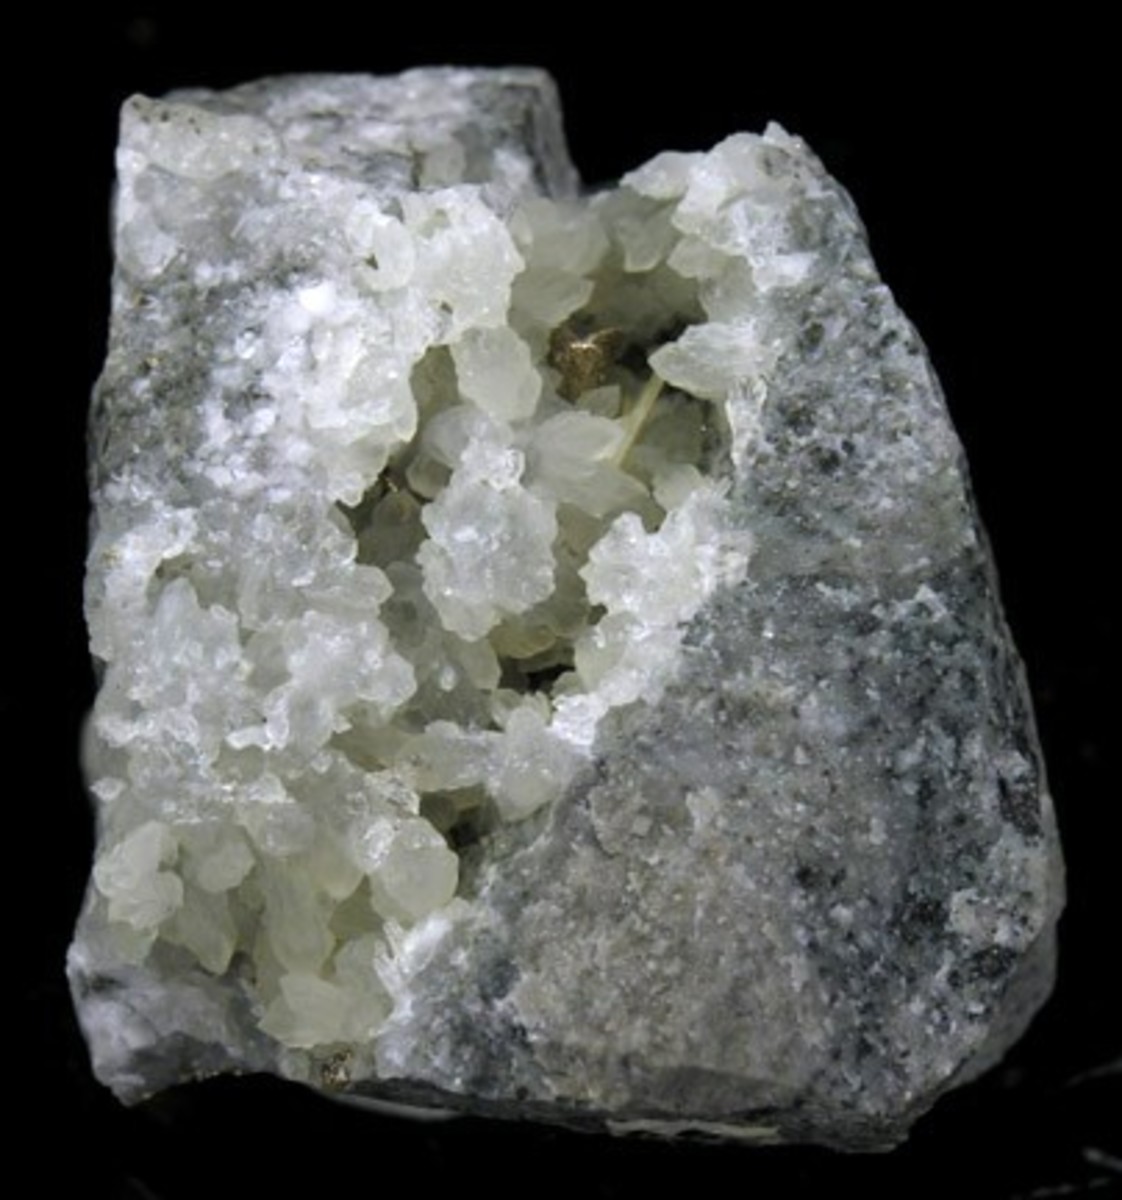 This rare gold silver telluride forms in some of the finest crystals in the world in the Cripple Creek Mining District. Fine crystals of Krennerite on matrix are virtually impossible to obtain as the mines around Cripple Creek have long been played.